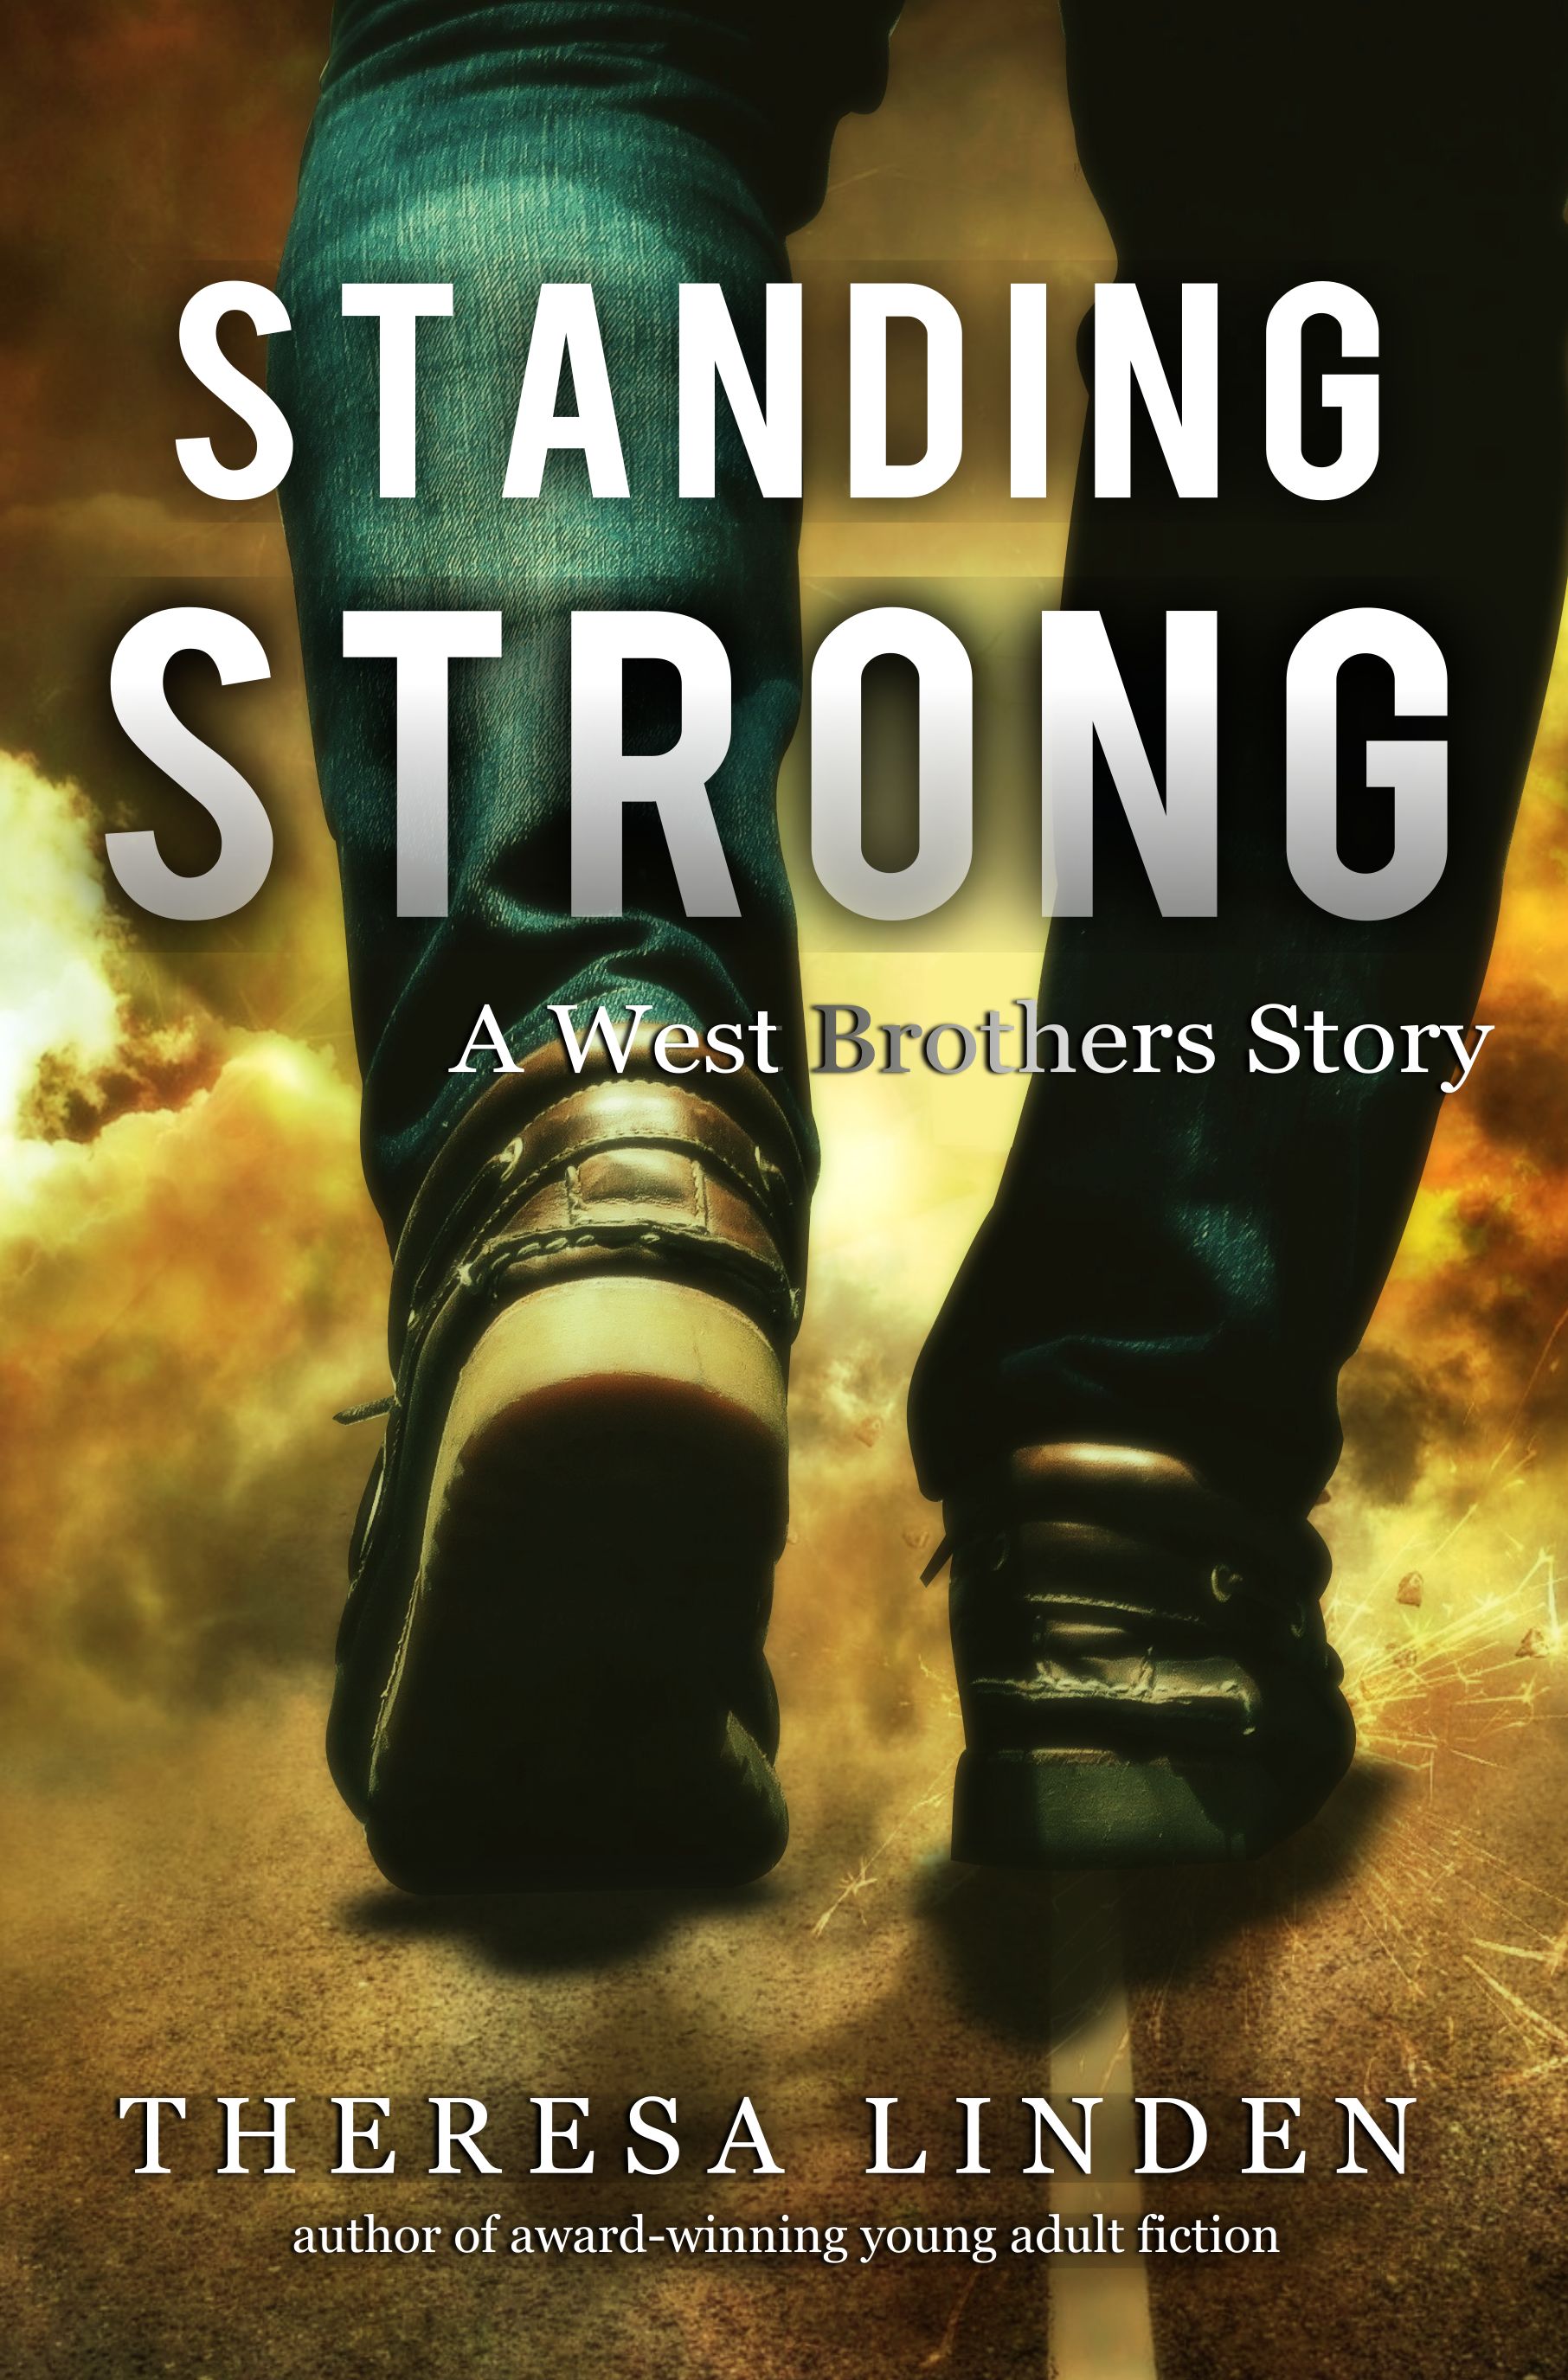 Westerlies brother. W brothers. Teresa strong Wilson's Touchstone stories. Standing strong